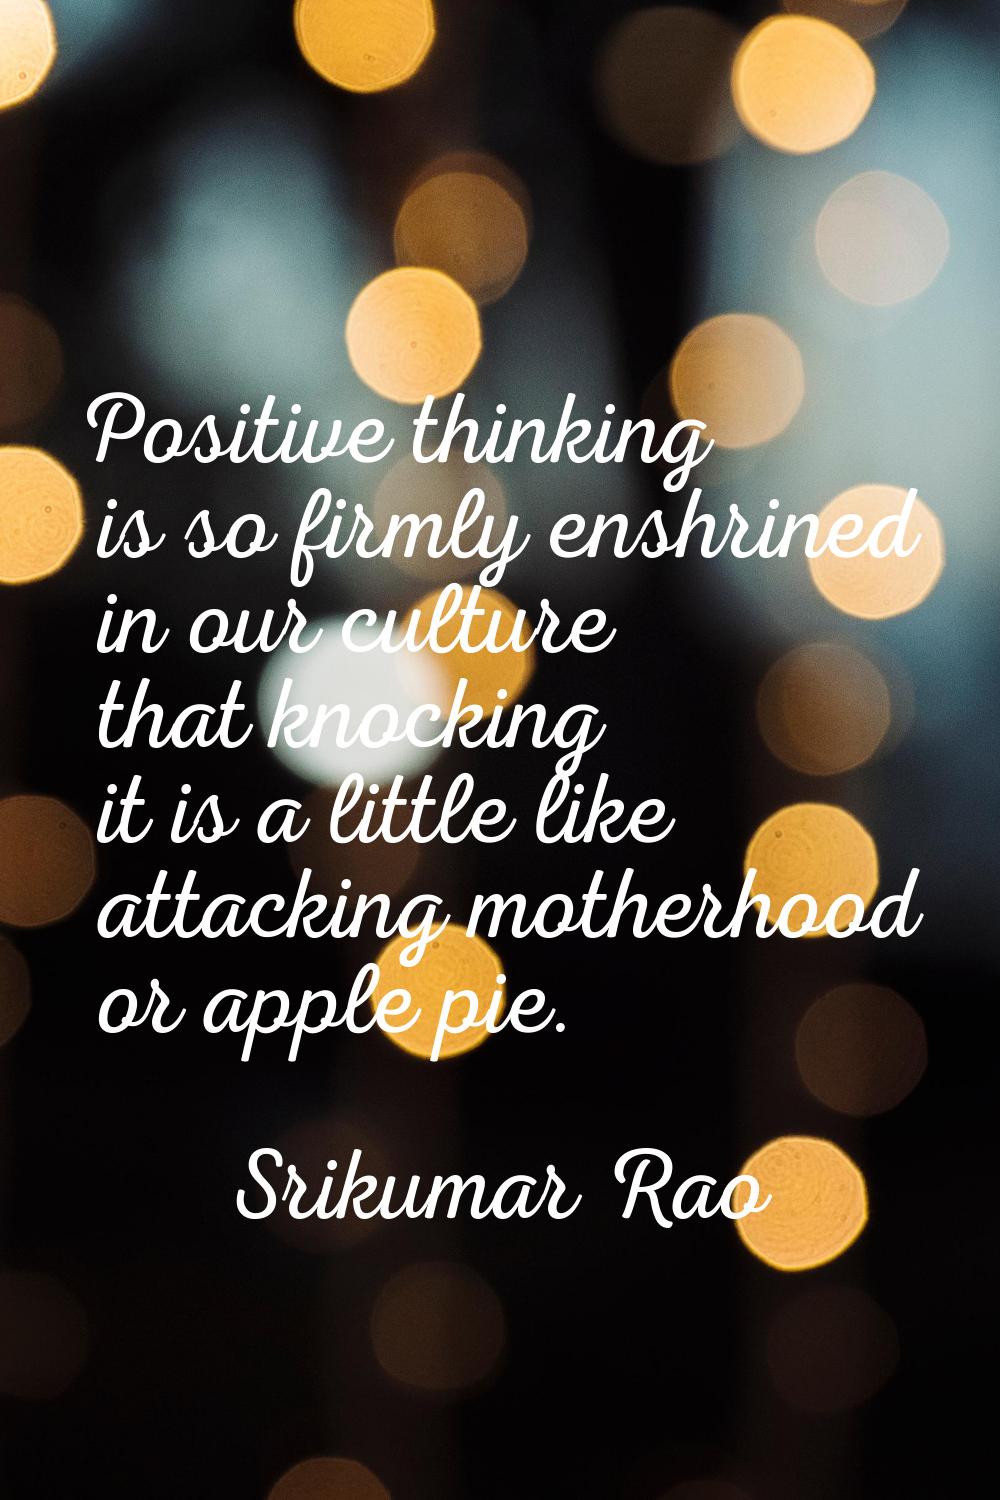 Positive thinking is so firmly enshrined in our culture that knocking it is a little like attacking